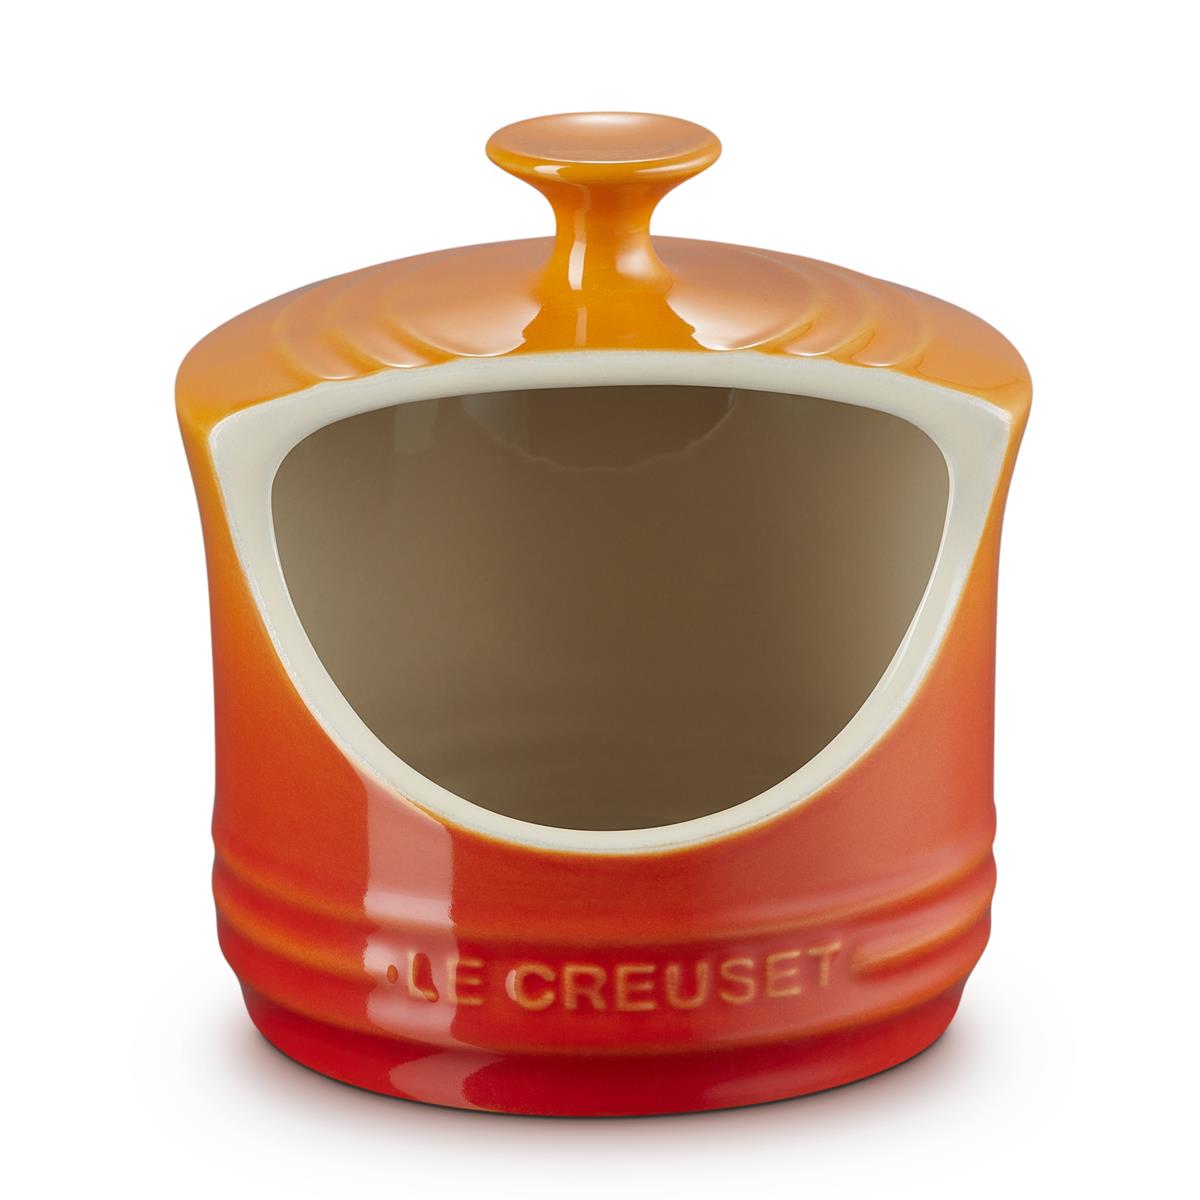 What material is the le creuset salt pig made of?